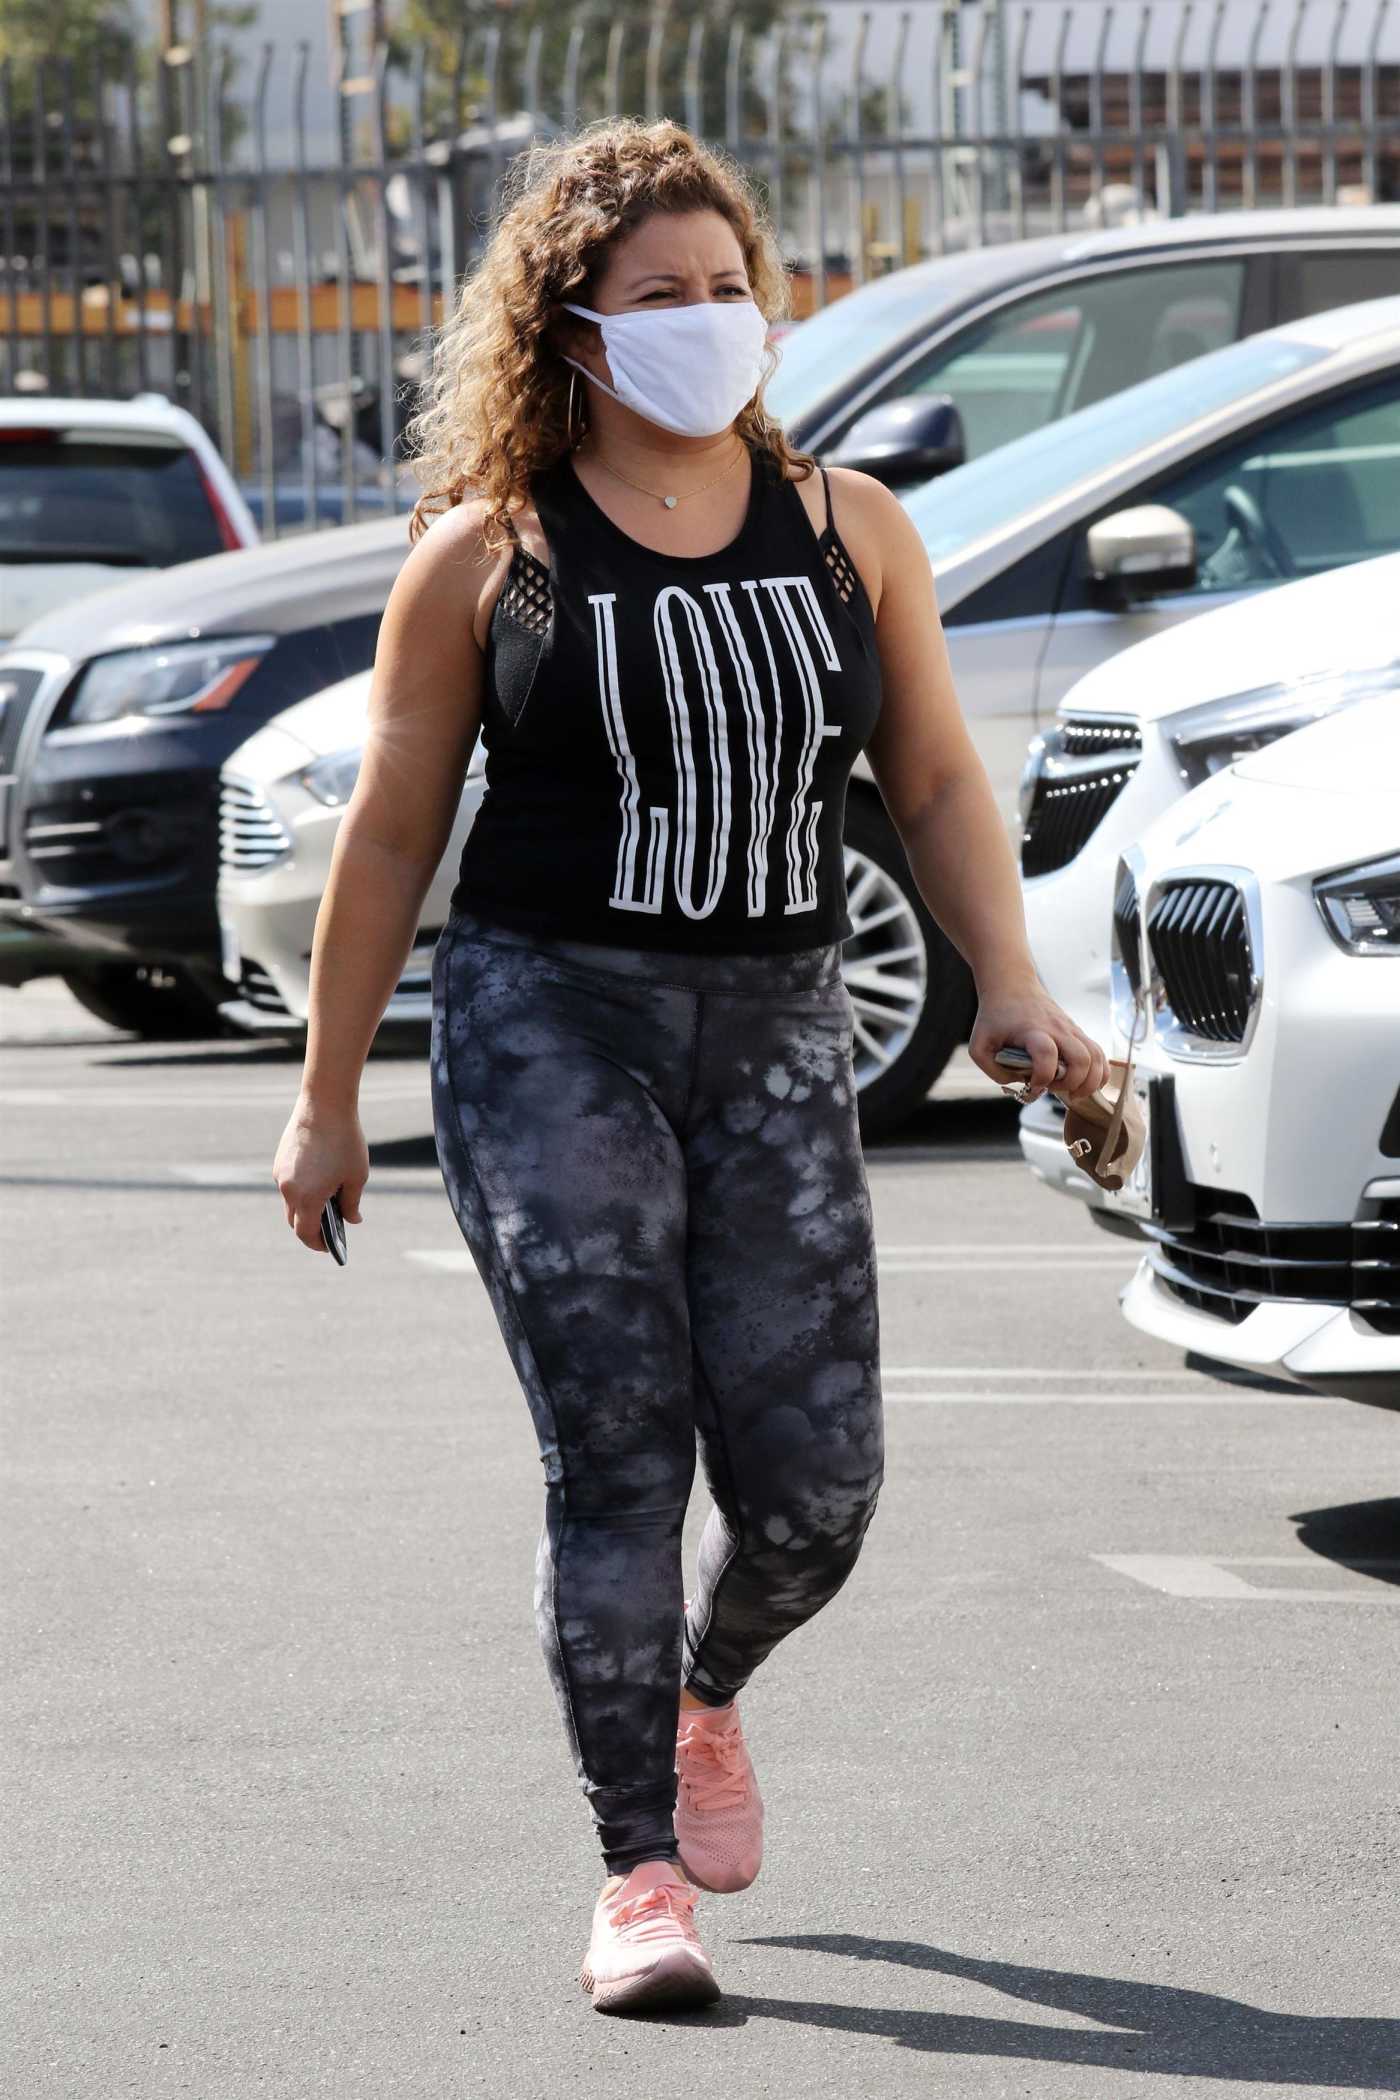 Justina Machado in a Grey Camo Leggings Arrives for Practice at the DWTS Studio in Los Angeles 09/18/2020